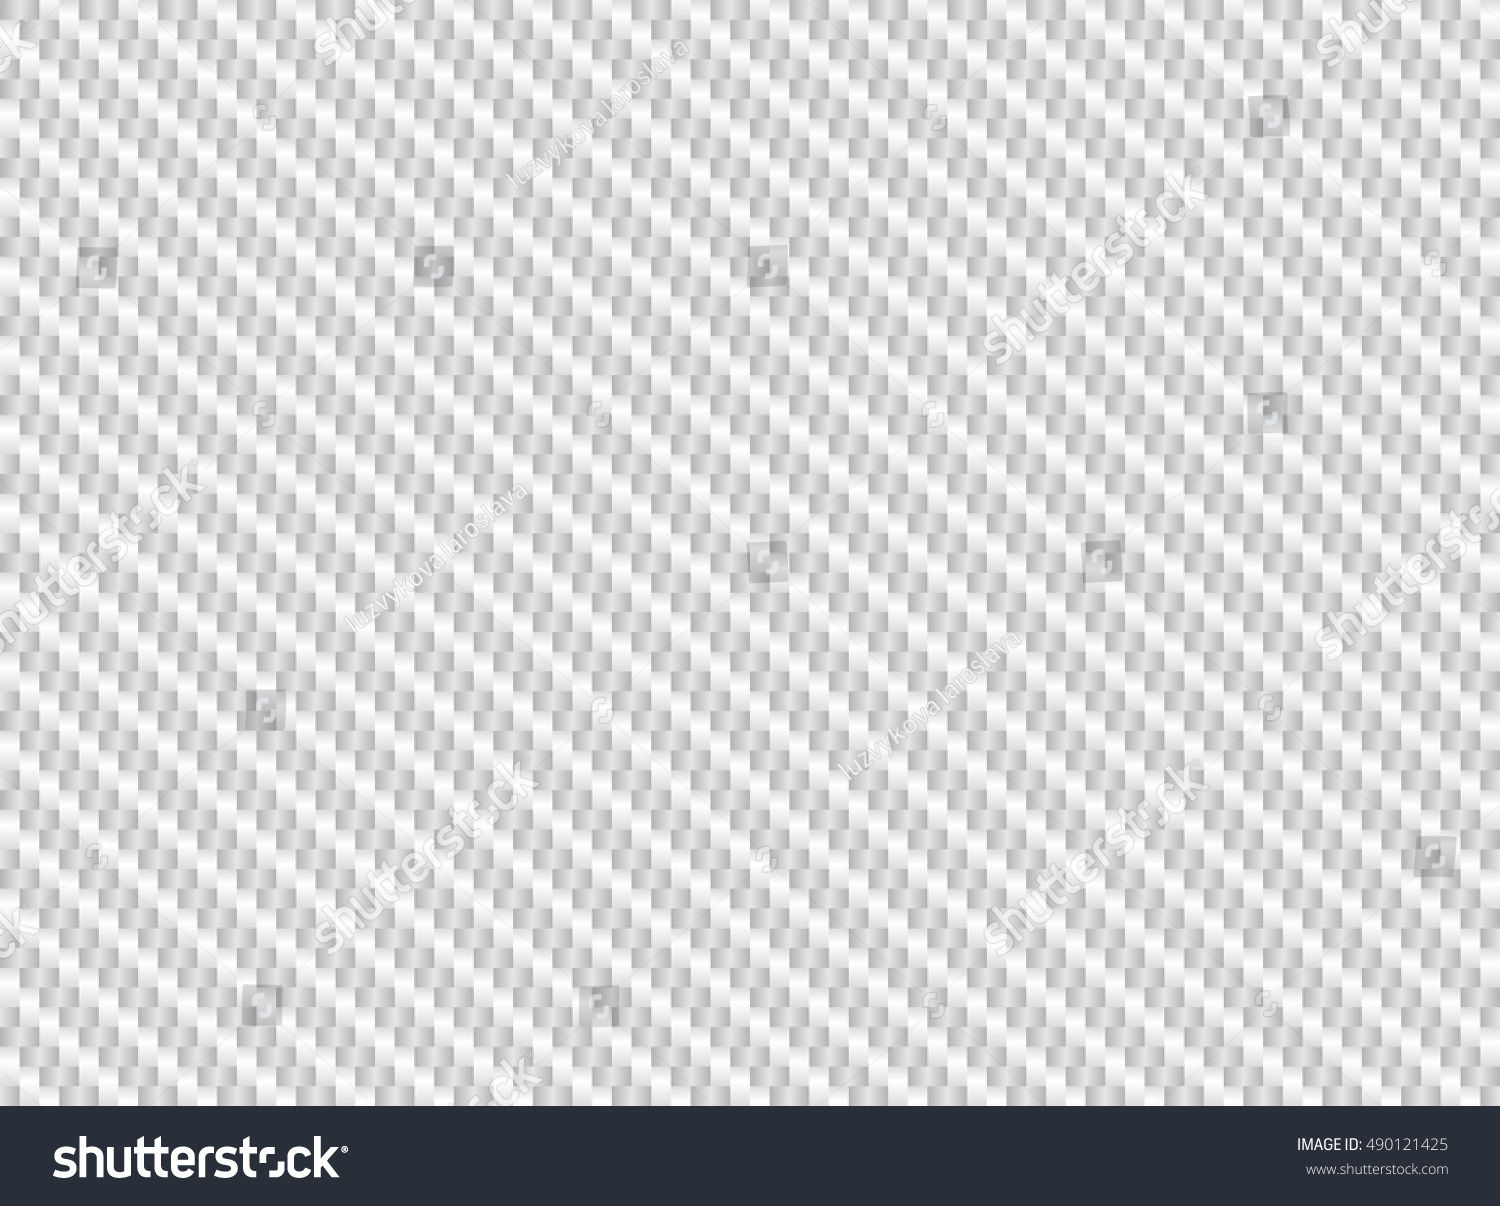 SVG of Vector white carbon fiber seamless background. Abstract cloth material wallpaper for car tuning or service. Endless light web texture or page fill pattern svg